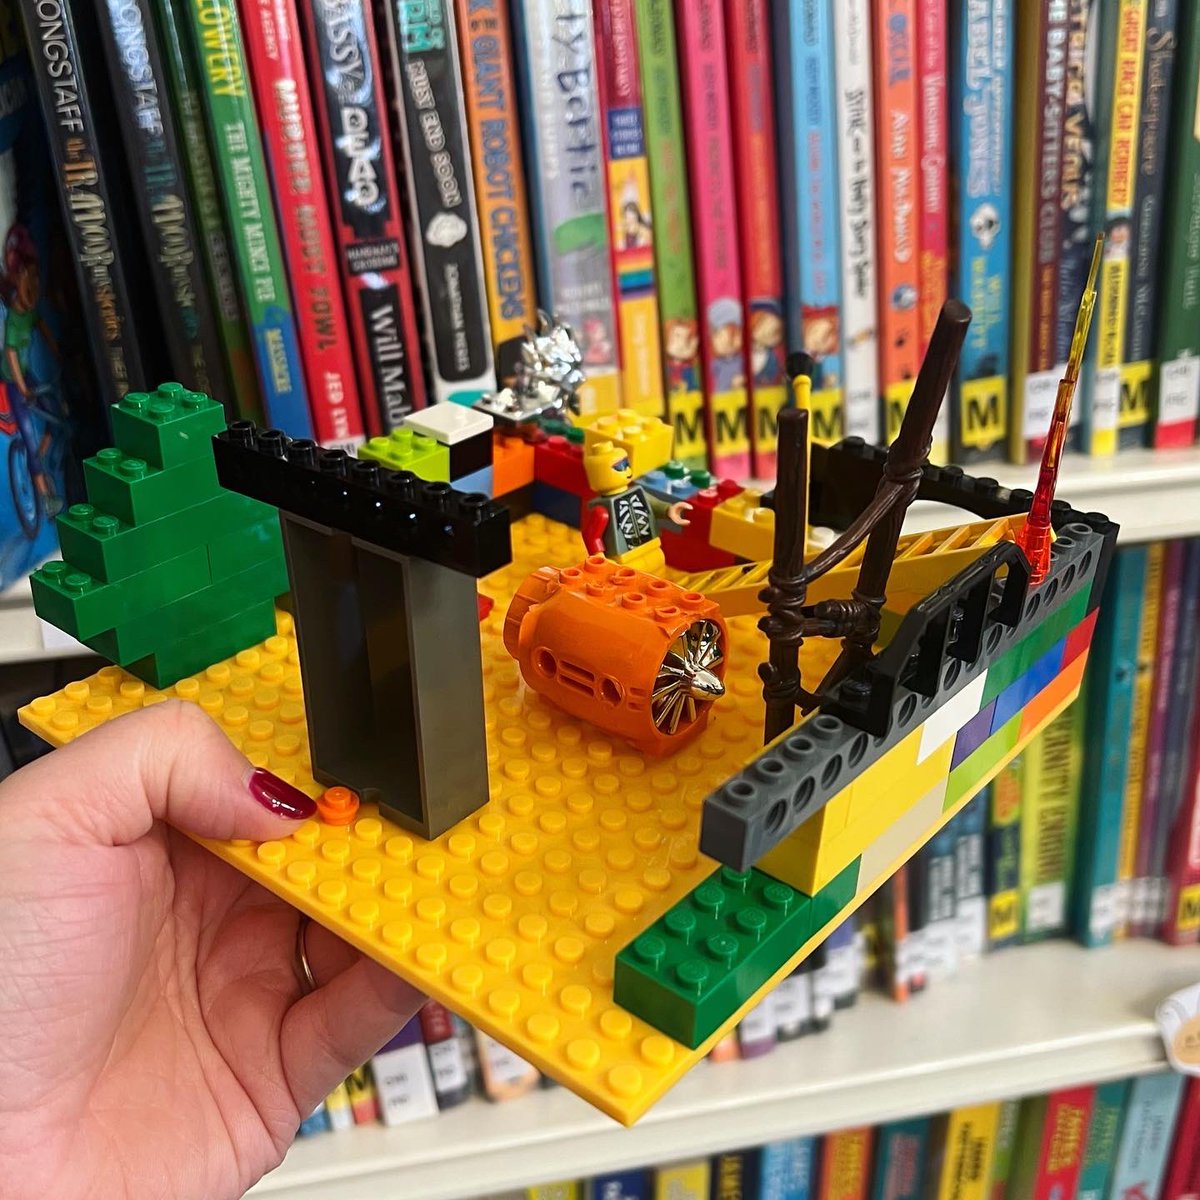 We have so much fun at #LegoClub on Tuesday’s from 4-5pm at #CharltonLibrary! 🧱 We made some imaginative builds which are on display in the children’s library! Create, learn and share your skills with other #LEGO enthusiasts, make friends and have fun! #LoveYourLibrary